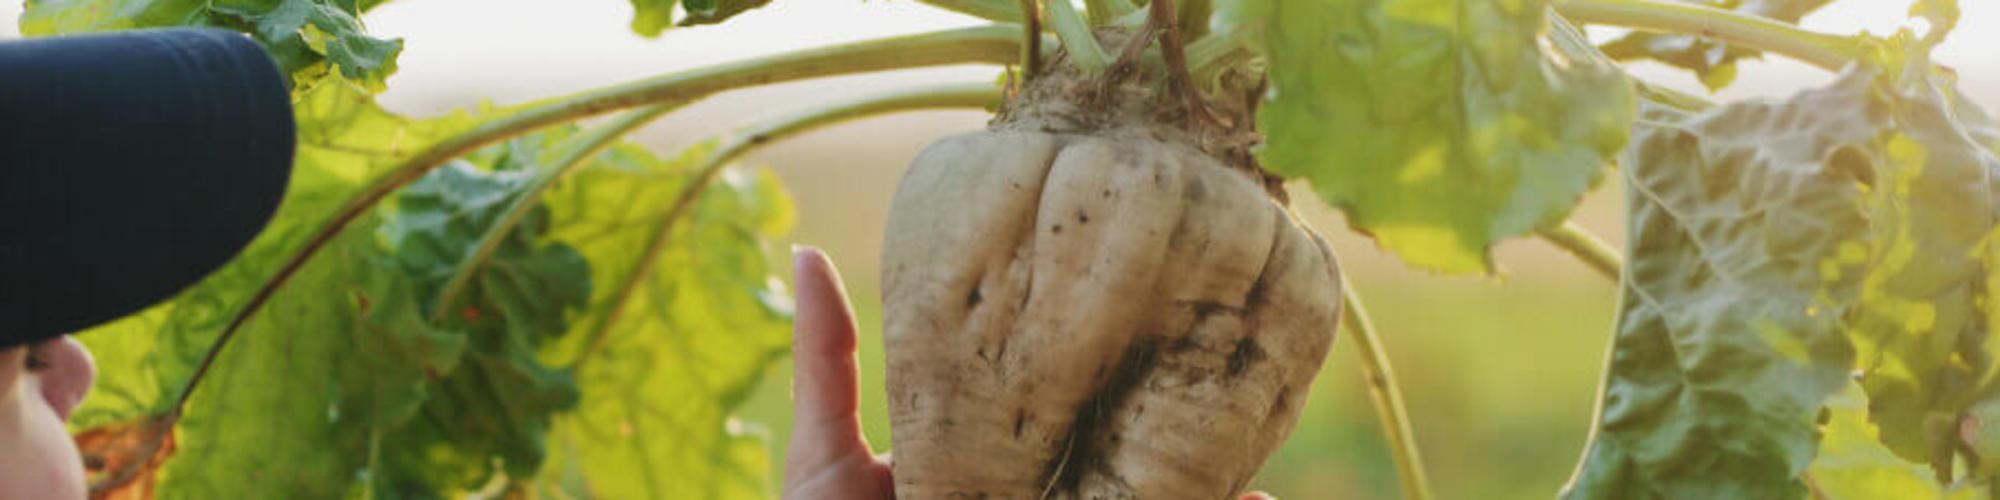 Person holding a sugar beet